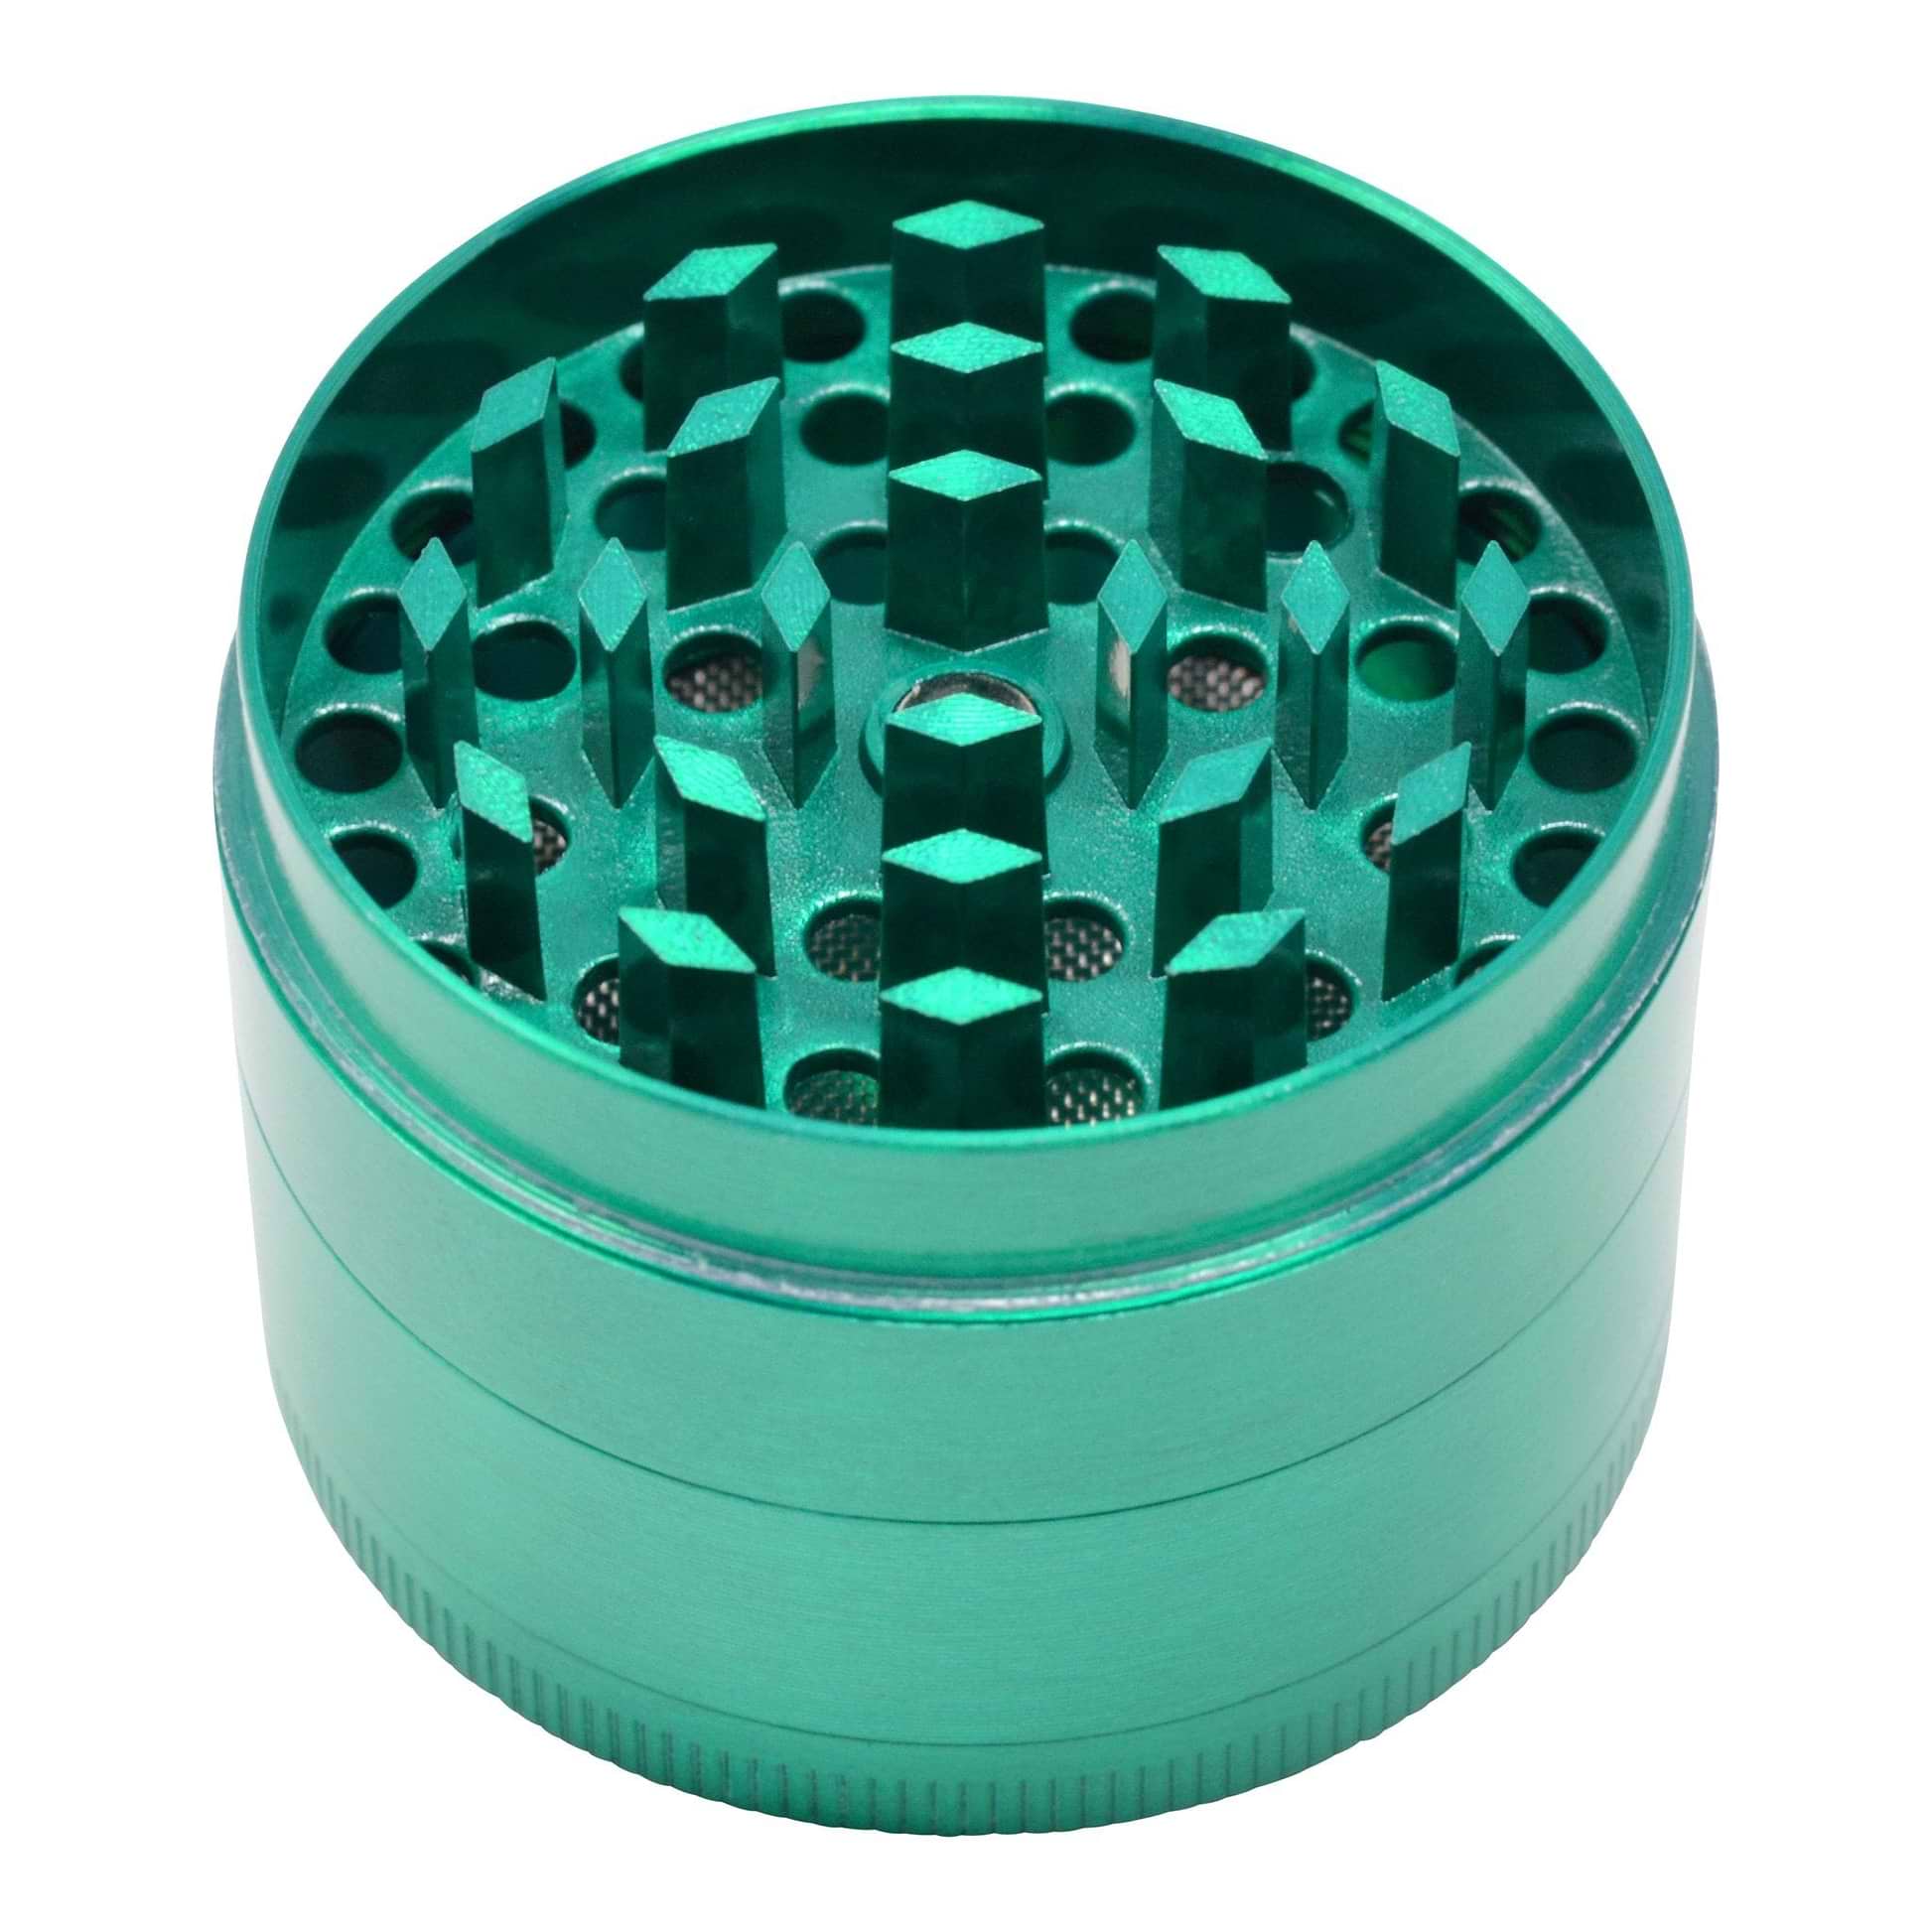 Full shot of the scraper of 4-piece 46mm metal grinder smoking accessory in stylish green color open without the lid